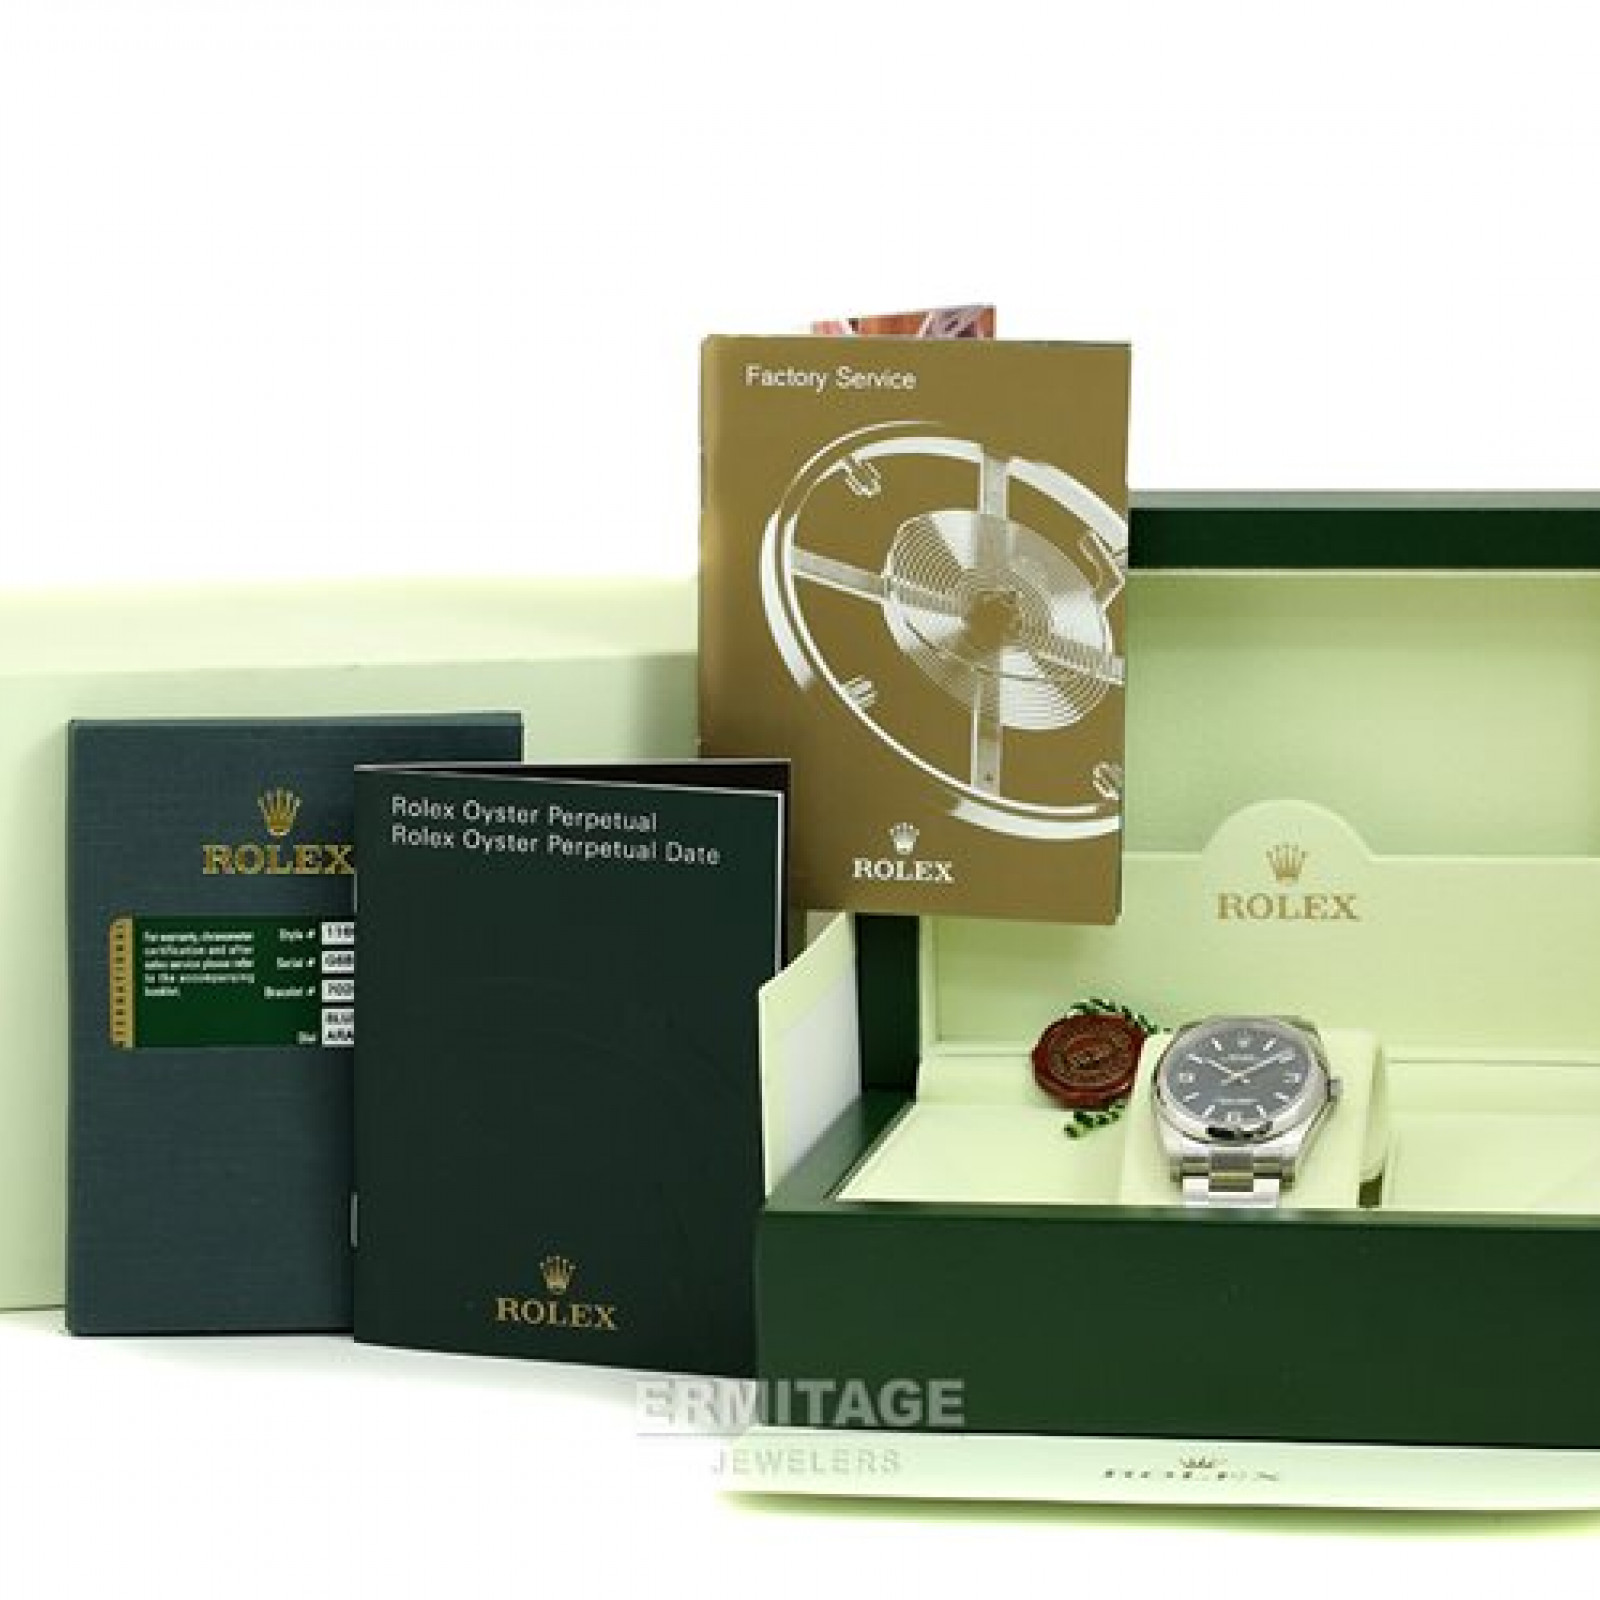 Rolex Oyster Perpetual 116000 Steel